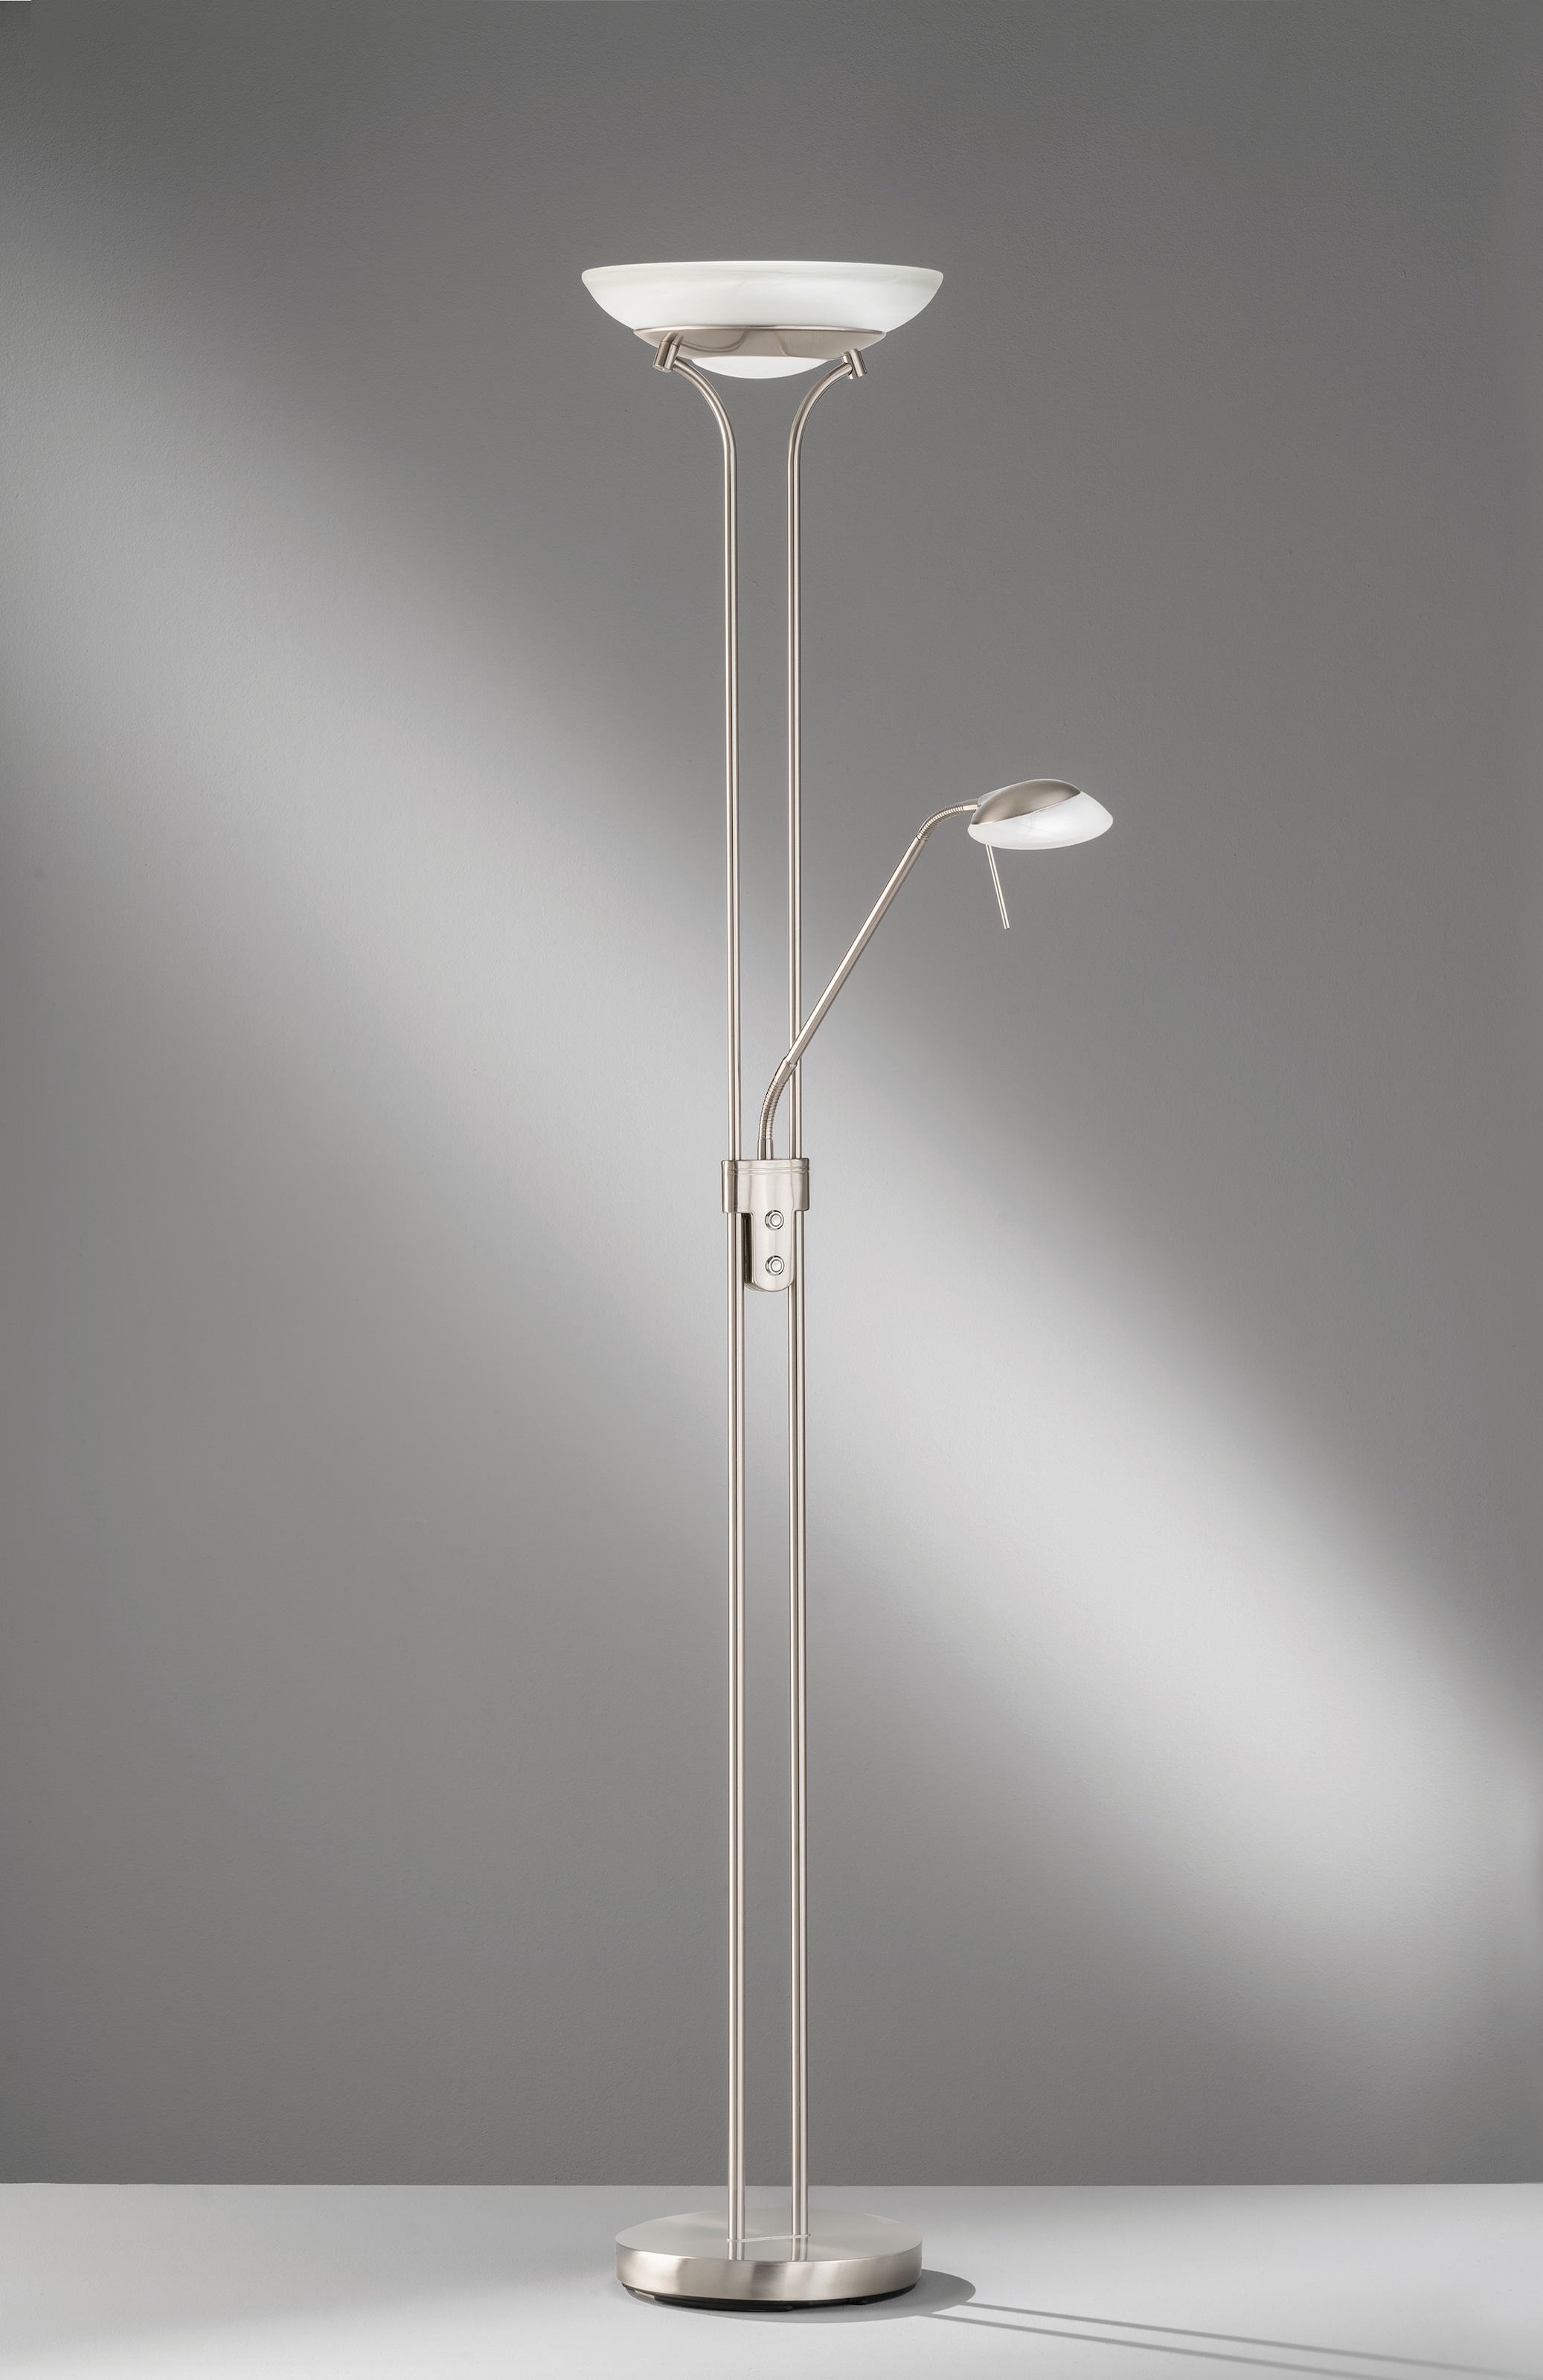 FISCHER & HONSEL LED Stehlampe bei flammig-flammig TW«, 1 »Pool OTTO